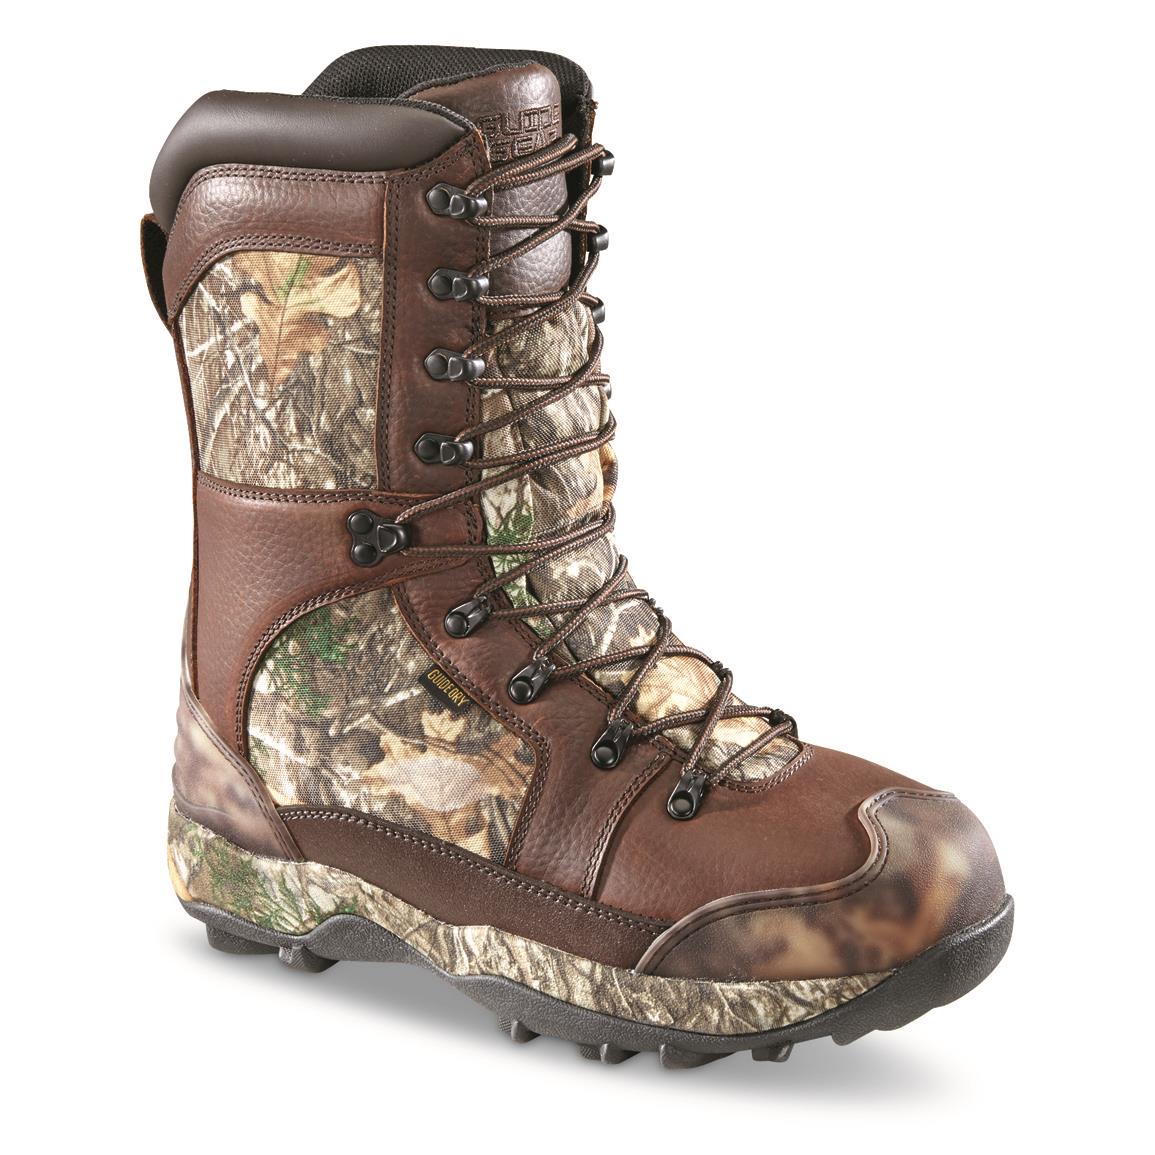 Mossy Oak Guide Gear Giant Timber II Men's Insulated Waterproof Hunting Boots 